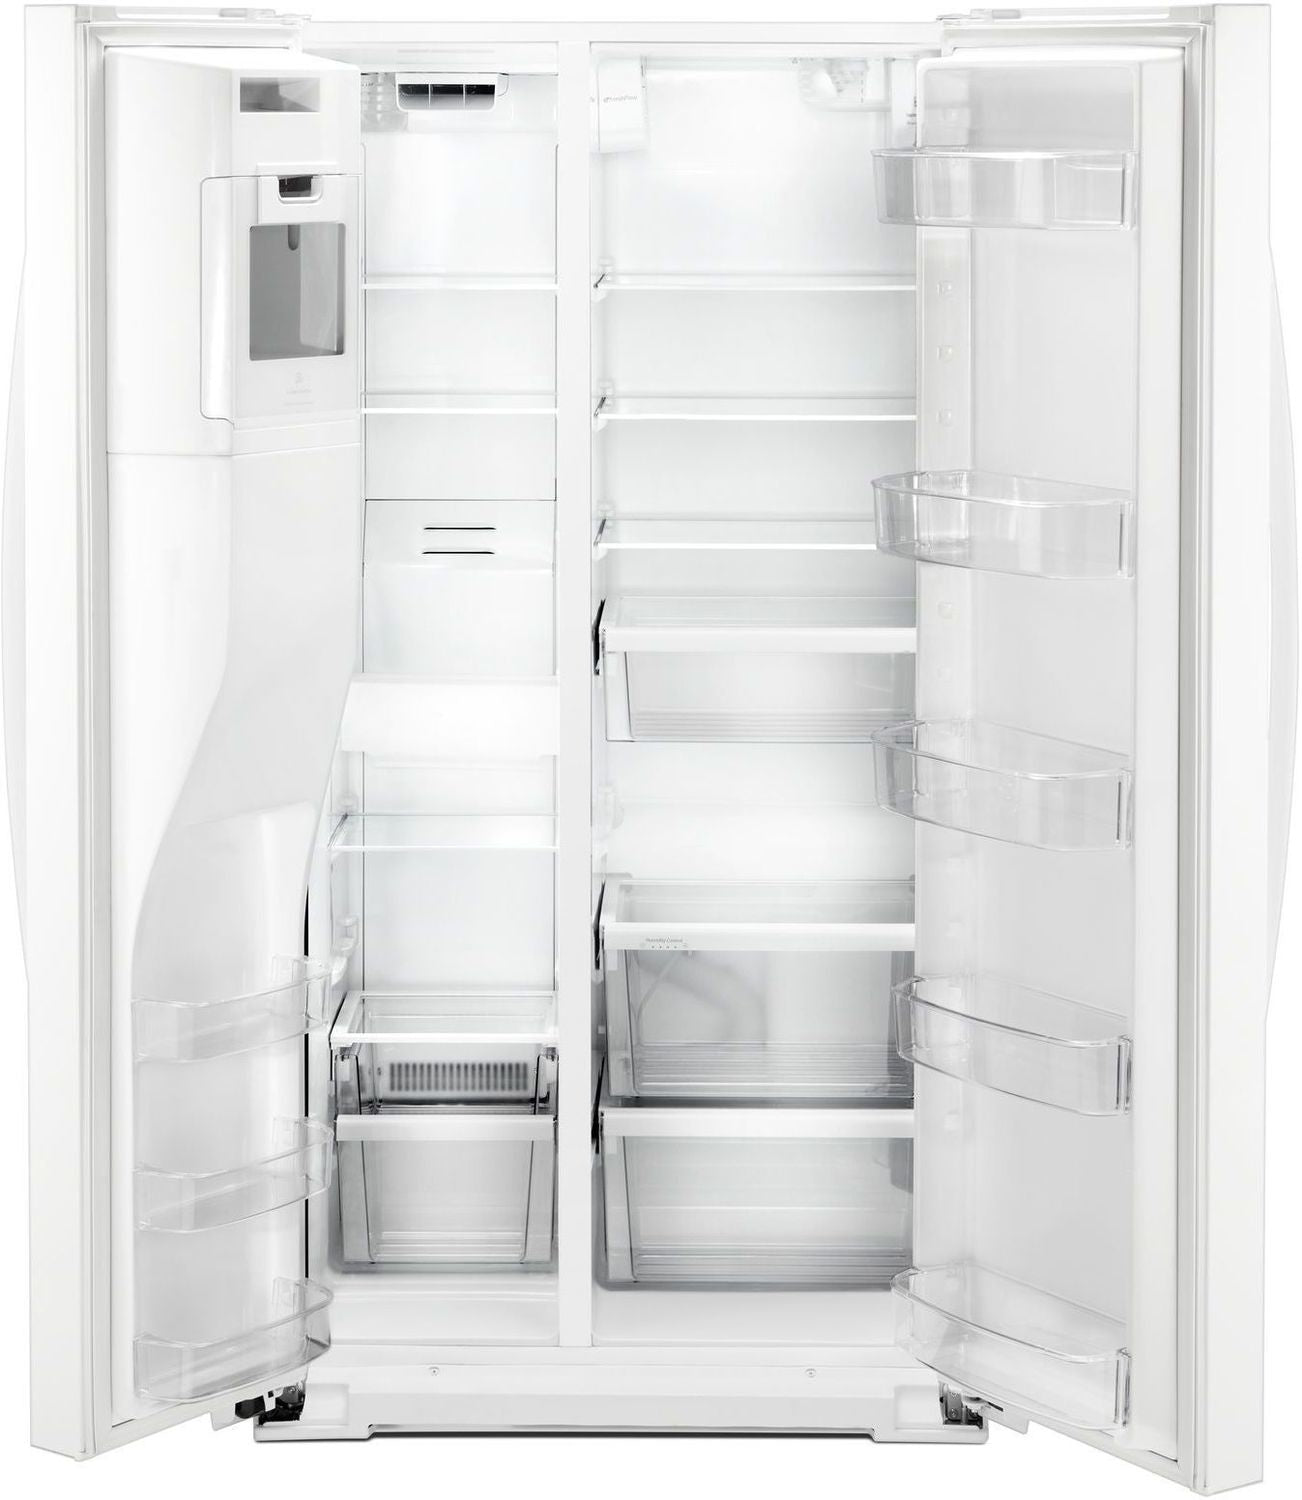 Whirlpool White Counter-Depth Side-by-Side Refrigerator (21 Cu. Ft.) - WRS571CIHW